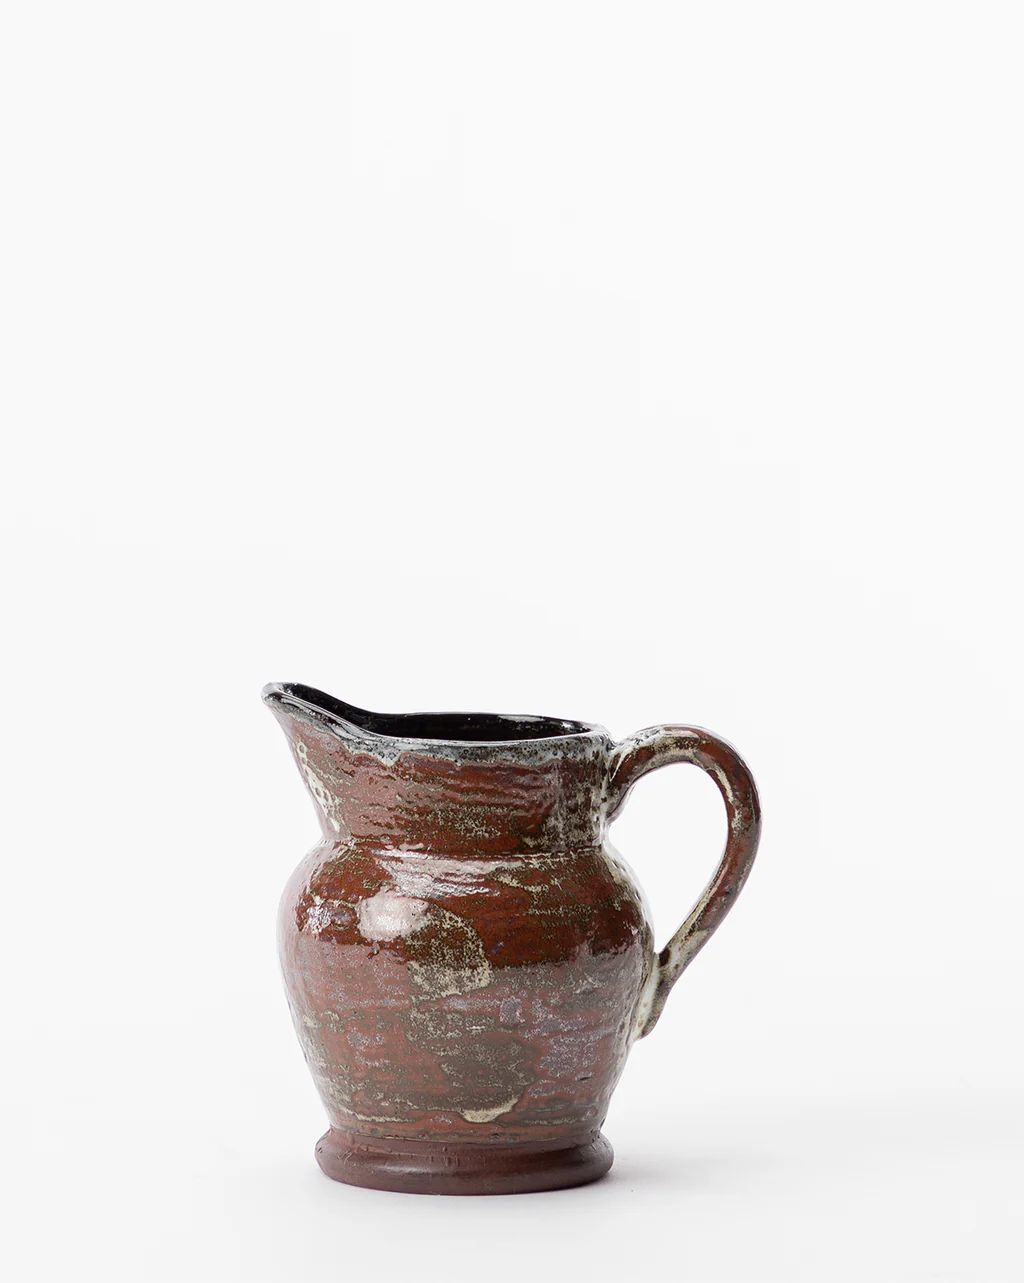 Handled Stoneware Pitcher | McGee & Co.